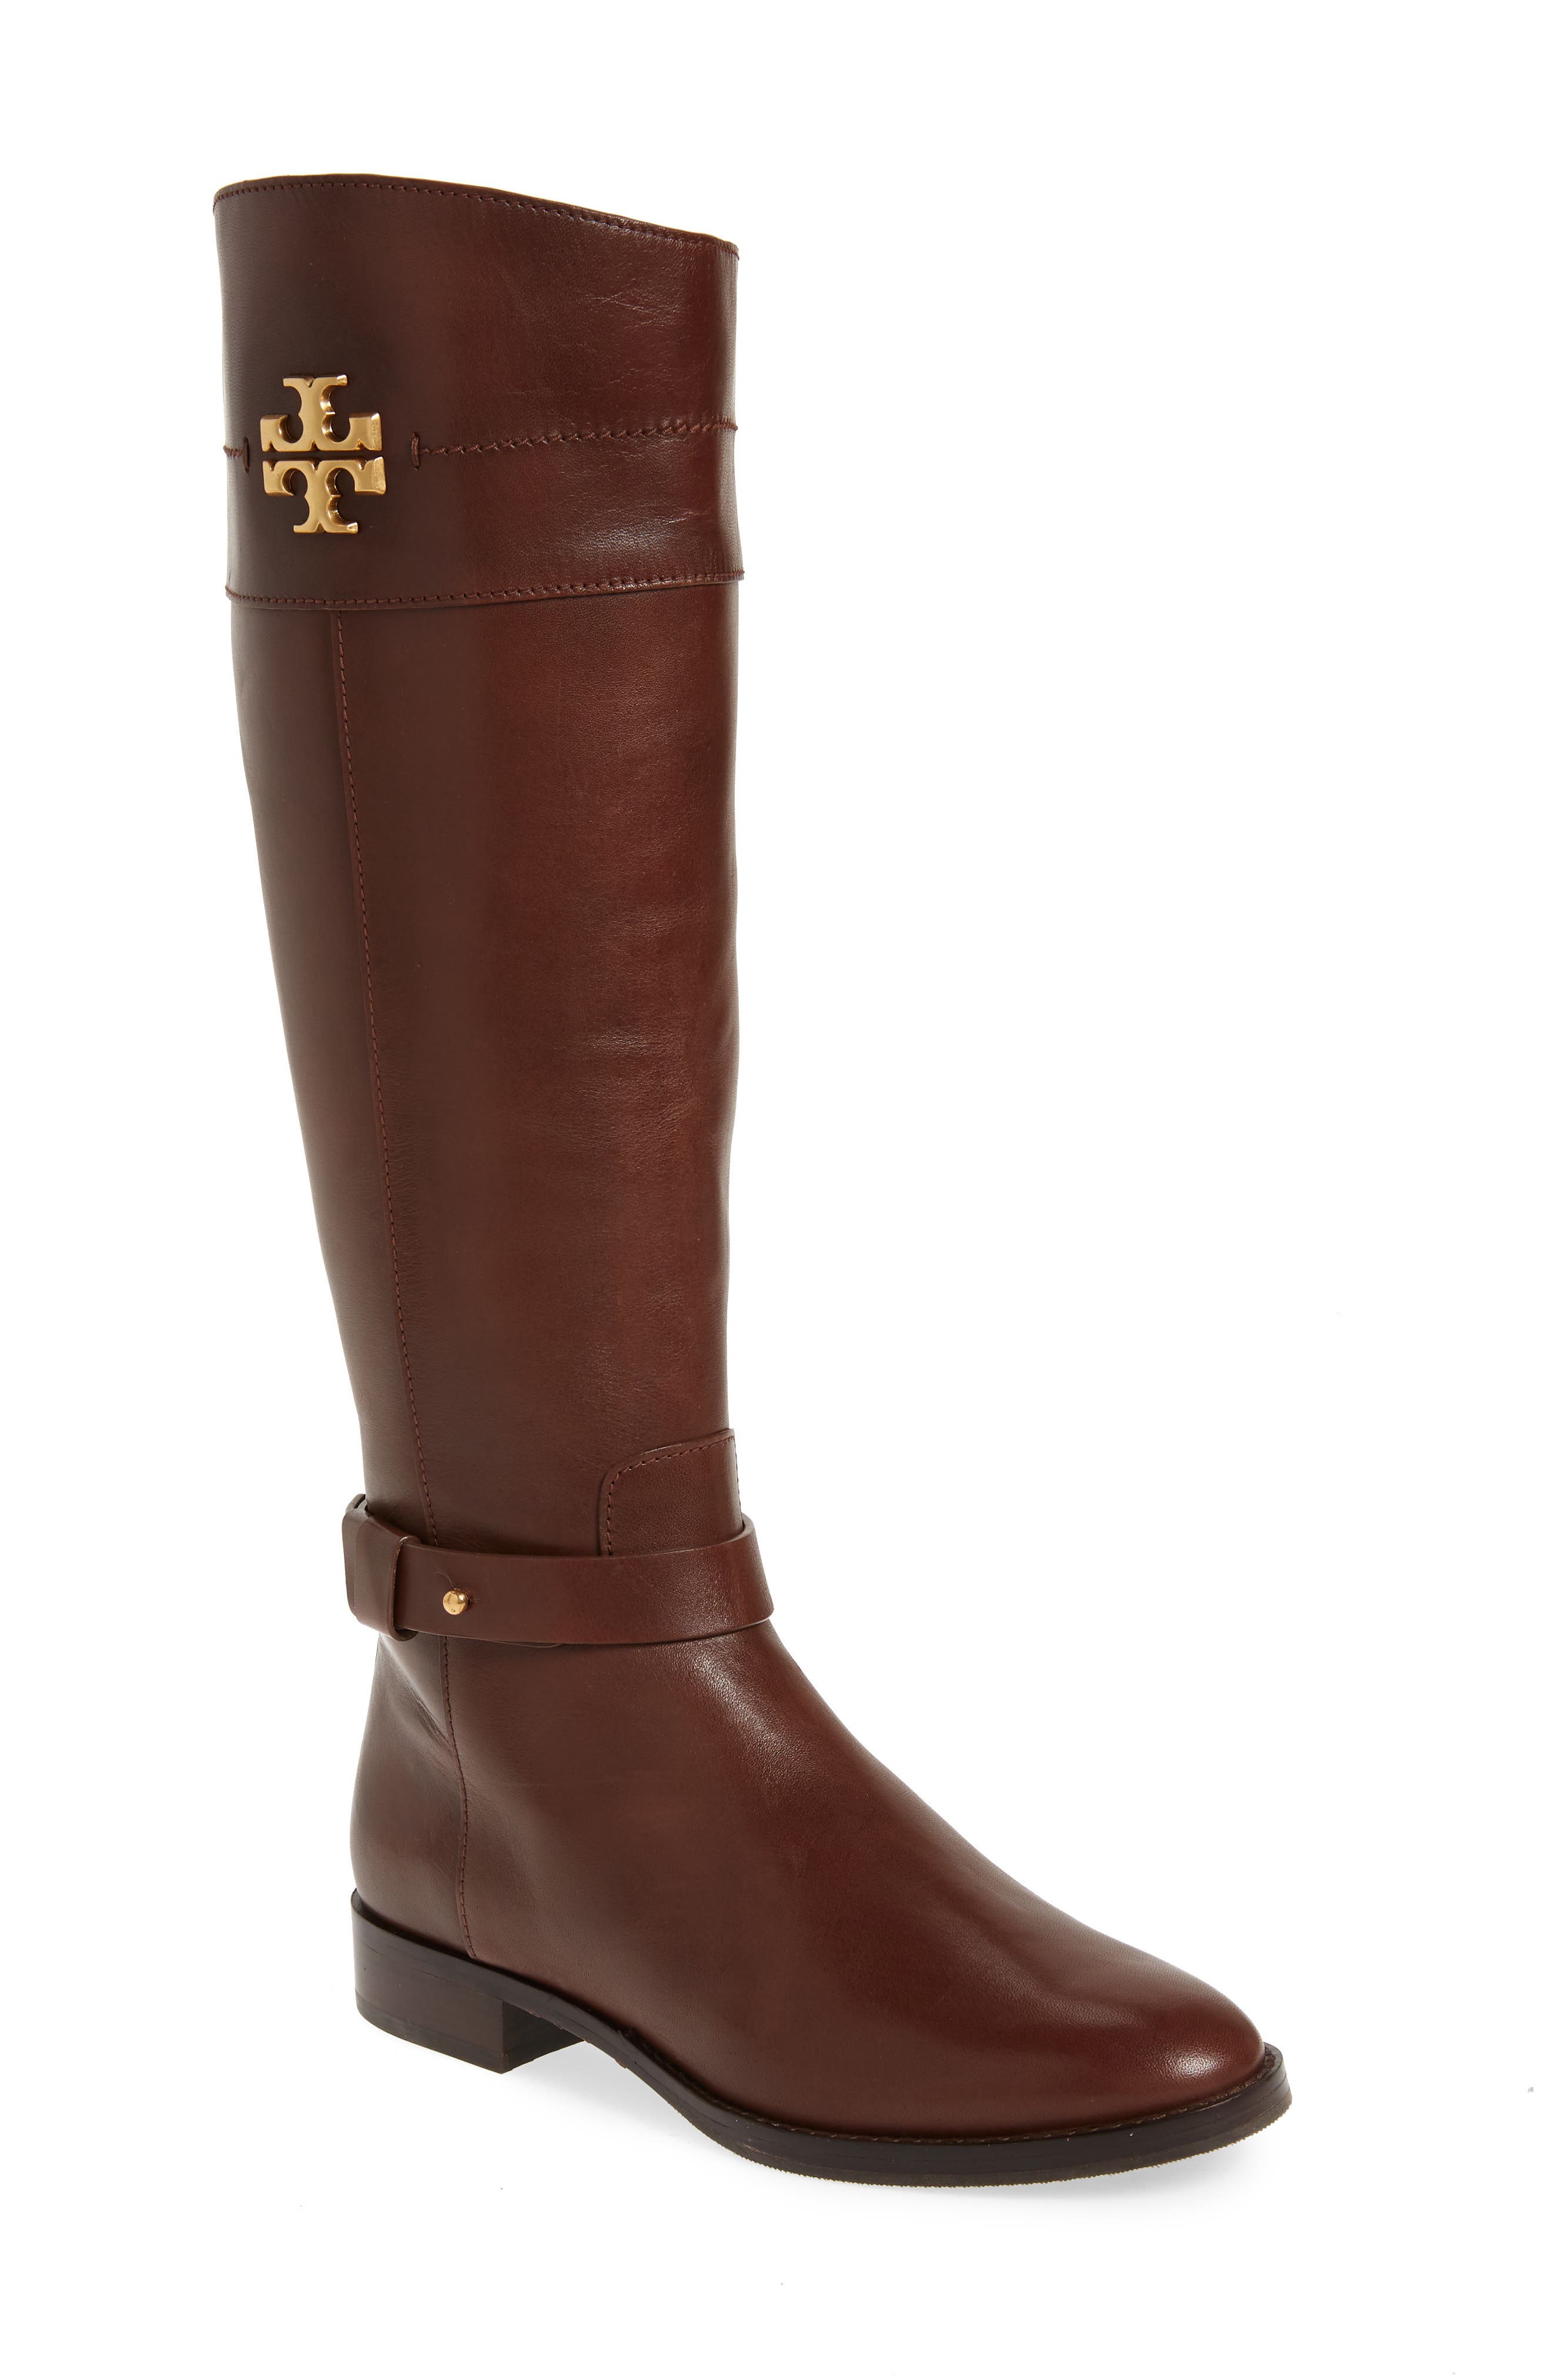 tory burch riding boots wide calf